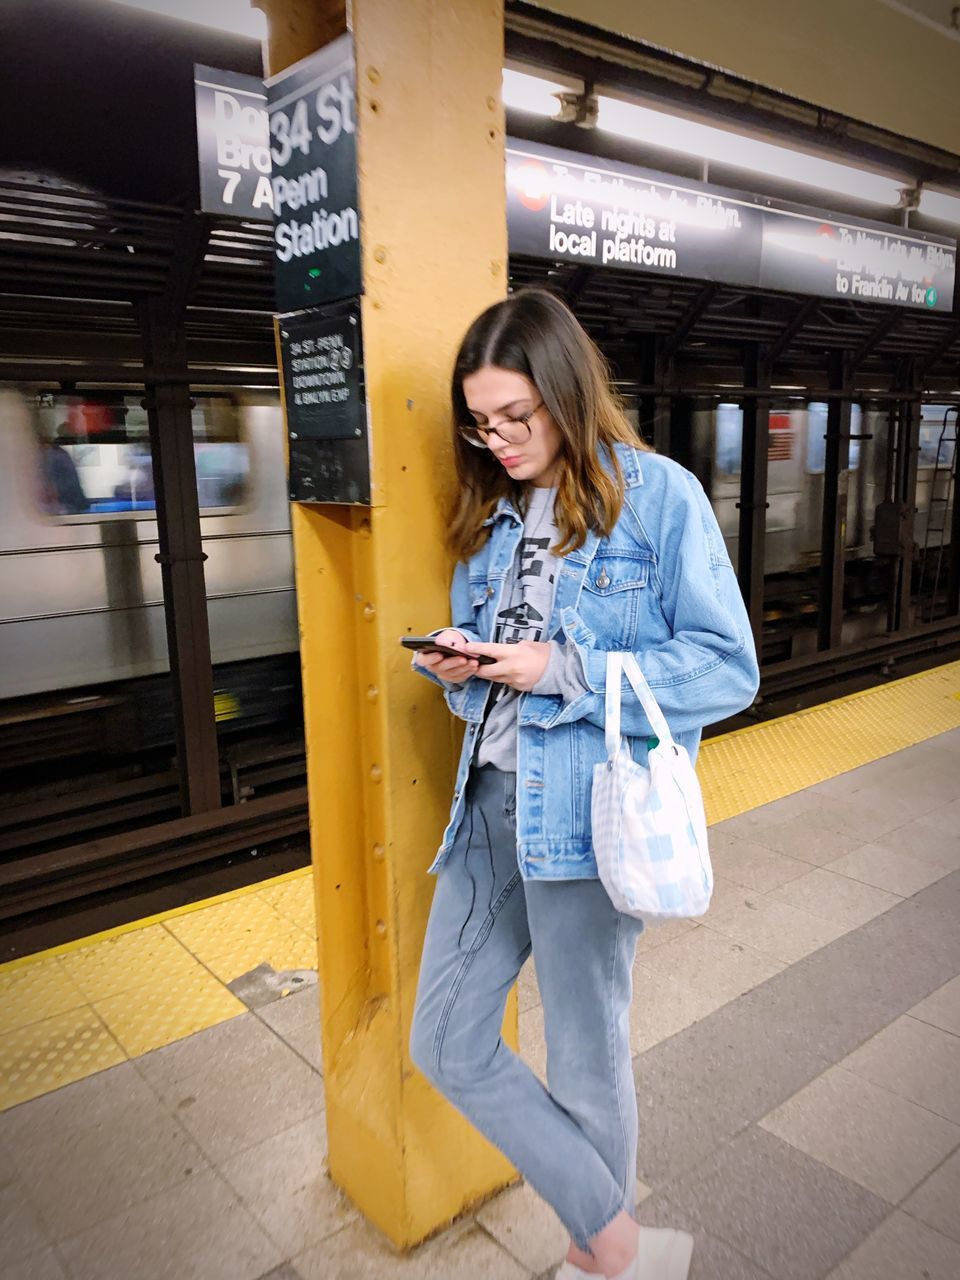 one person, communication, casual clothing, public transportation, technology, women, lifestyles, standing, real people, railroad station platform, railroad station, young adult, rail transportation, young women, wireless technology, transportation, mobile phone, holding, adult, beautiful woman, hairstyle, subway train